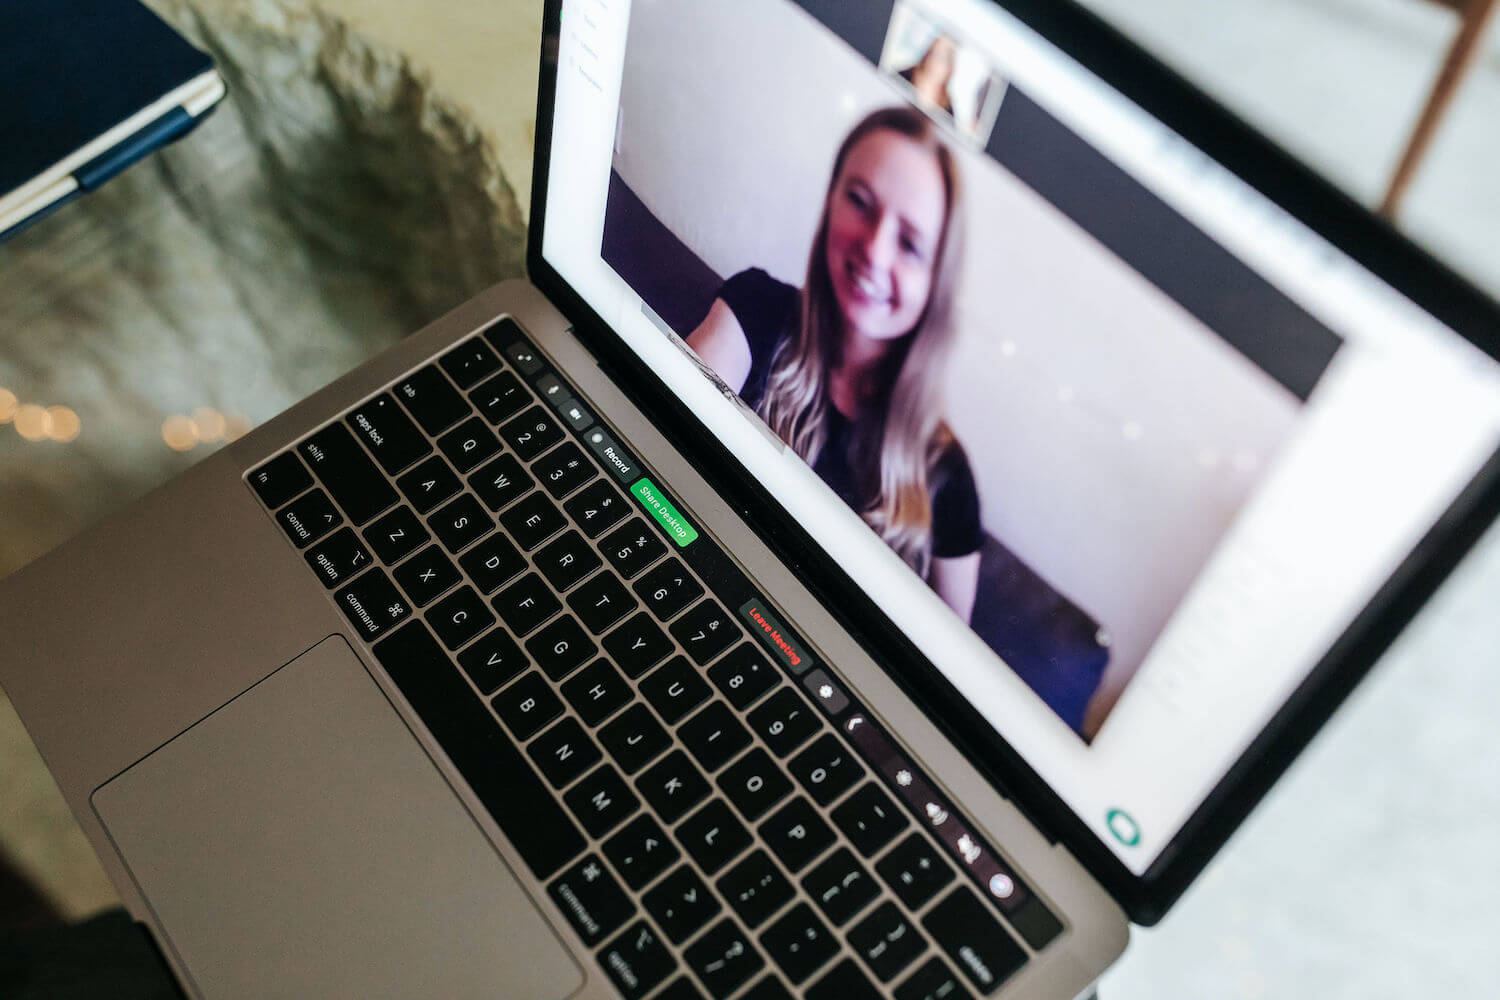 Dubsado for coaches. Image Description: Looking down on a laptop at an angle, the screen is open to Zoom and a blonde woman wearing a black top is smiling into the camera.